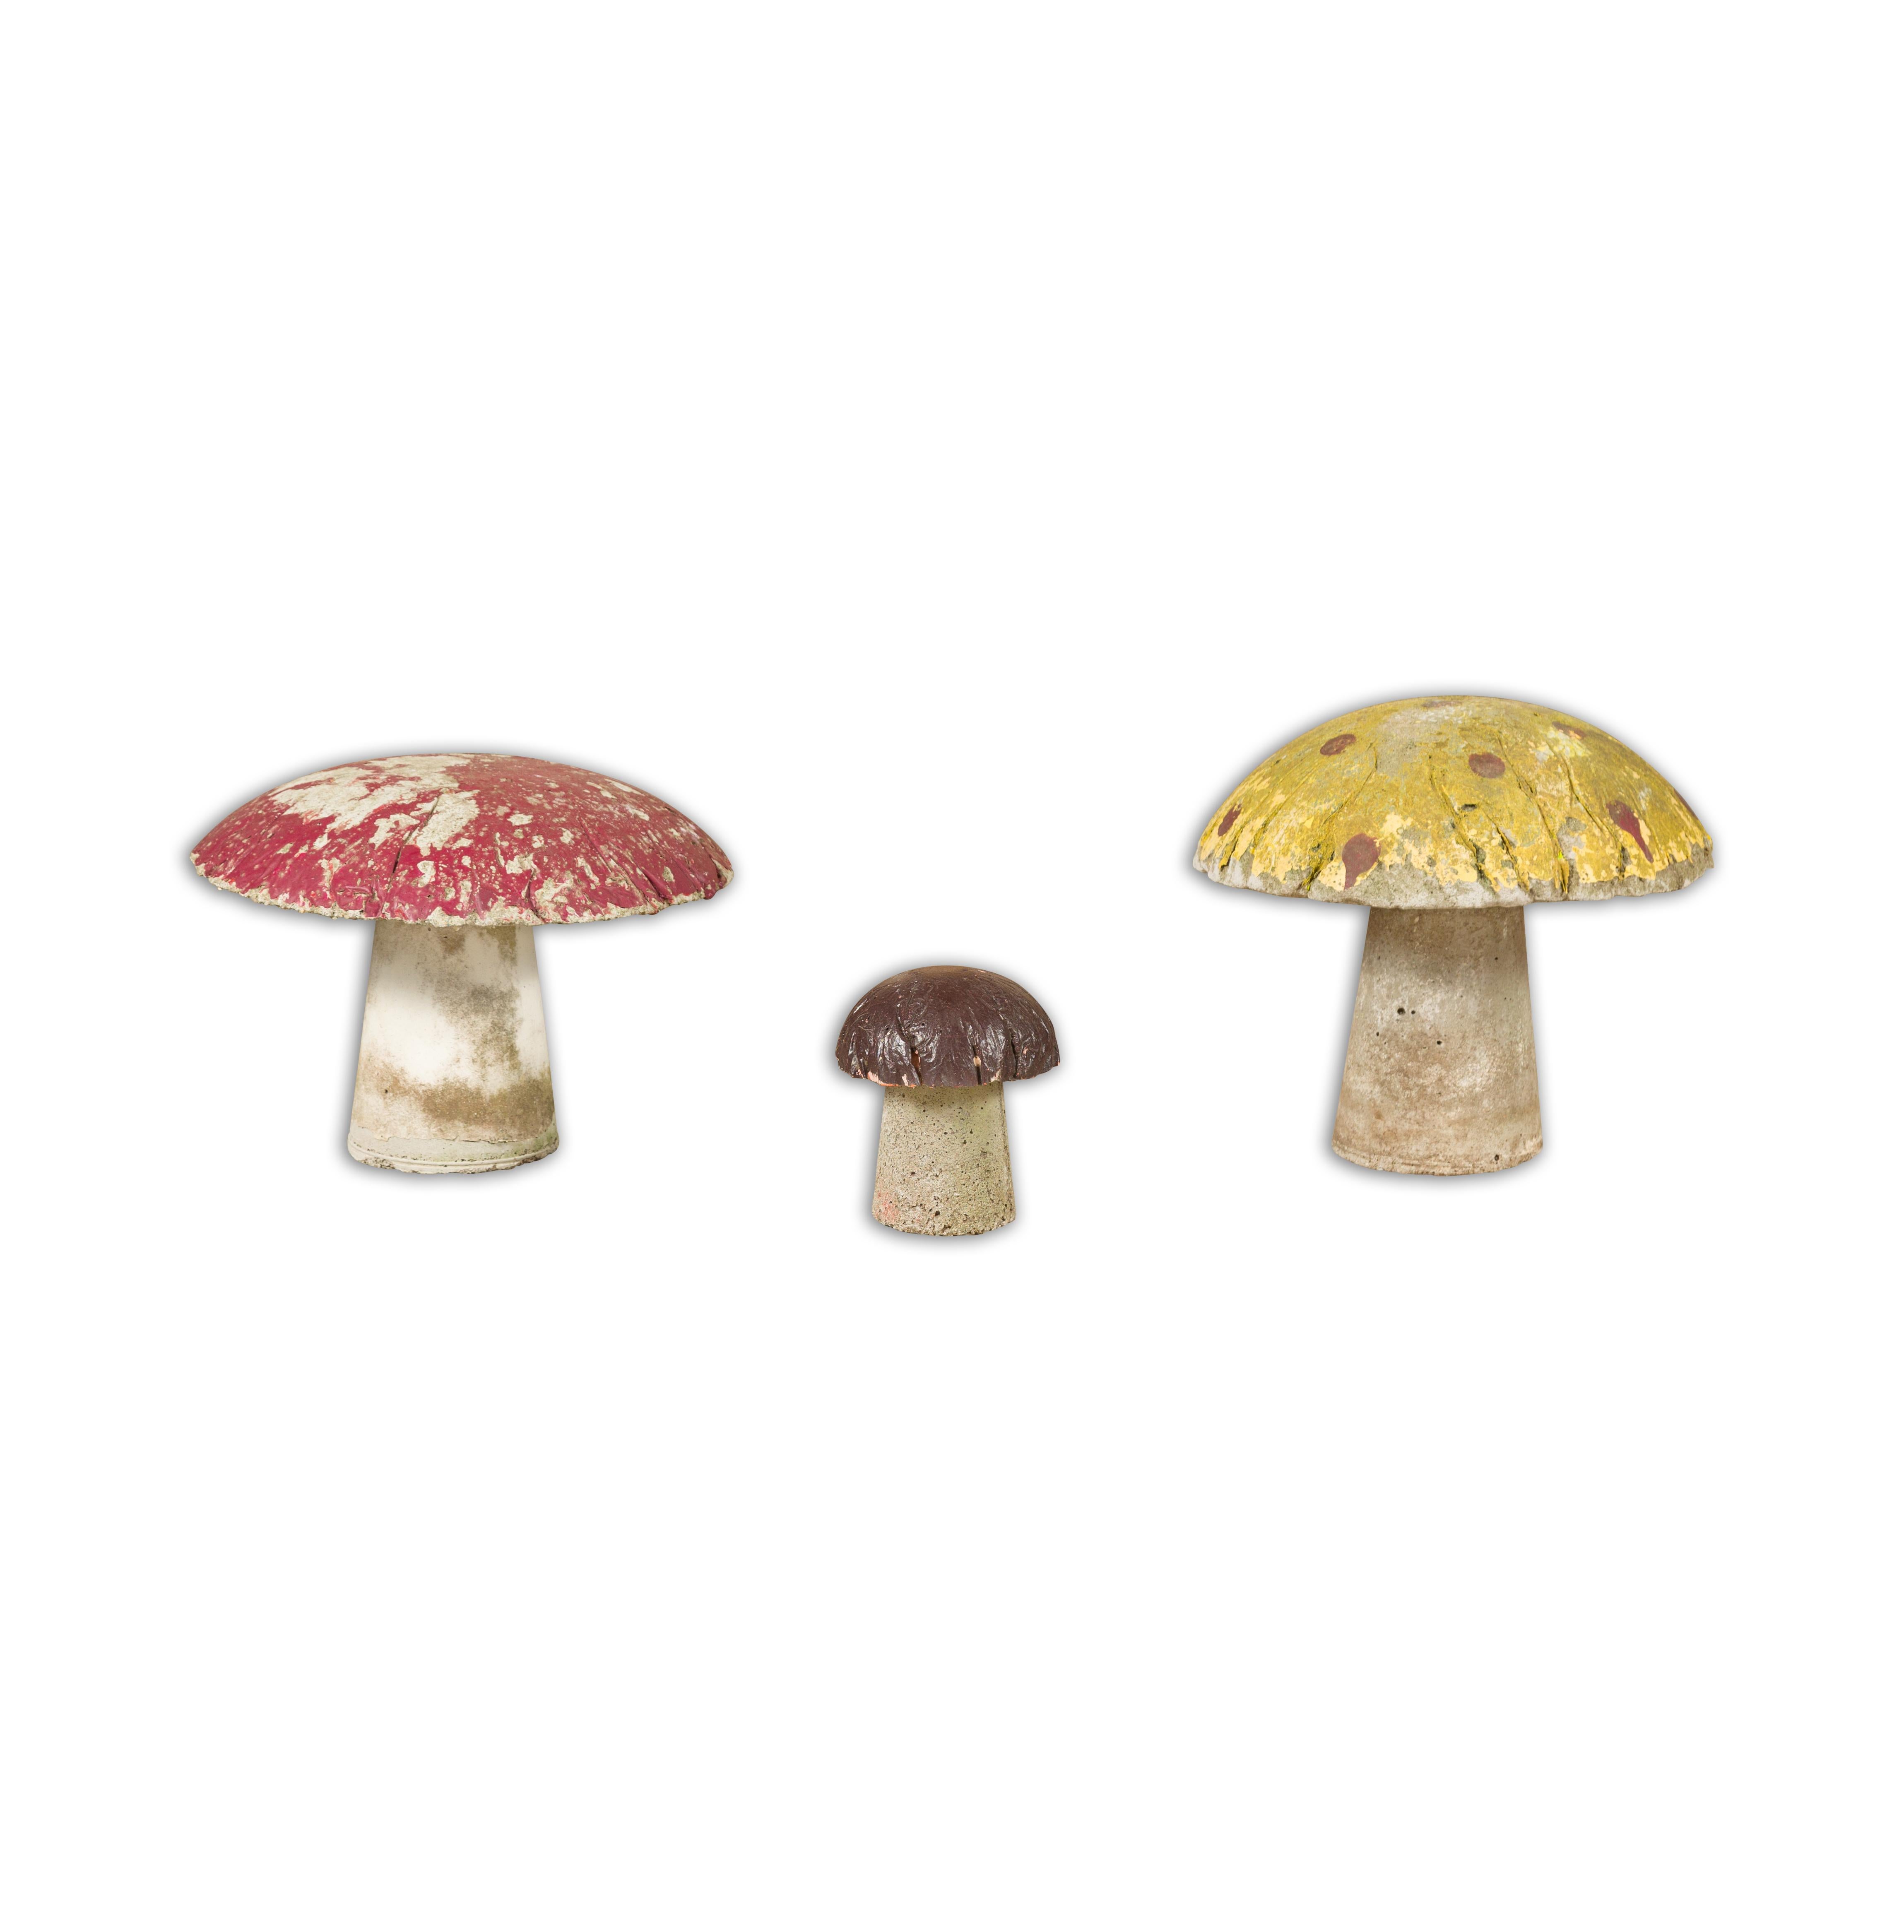 A set of three American Midcentury painted concrete mushroom garden ornaments with red, yellow and brown paint and nicely weathered appearance. Invite a touch of fantasy into your garden with this charming set of three American Midcentury painted